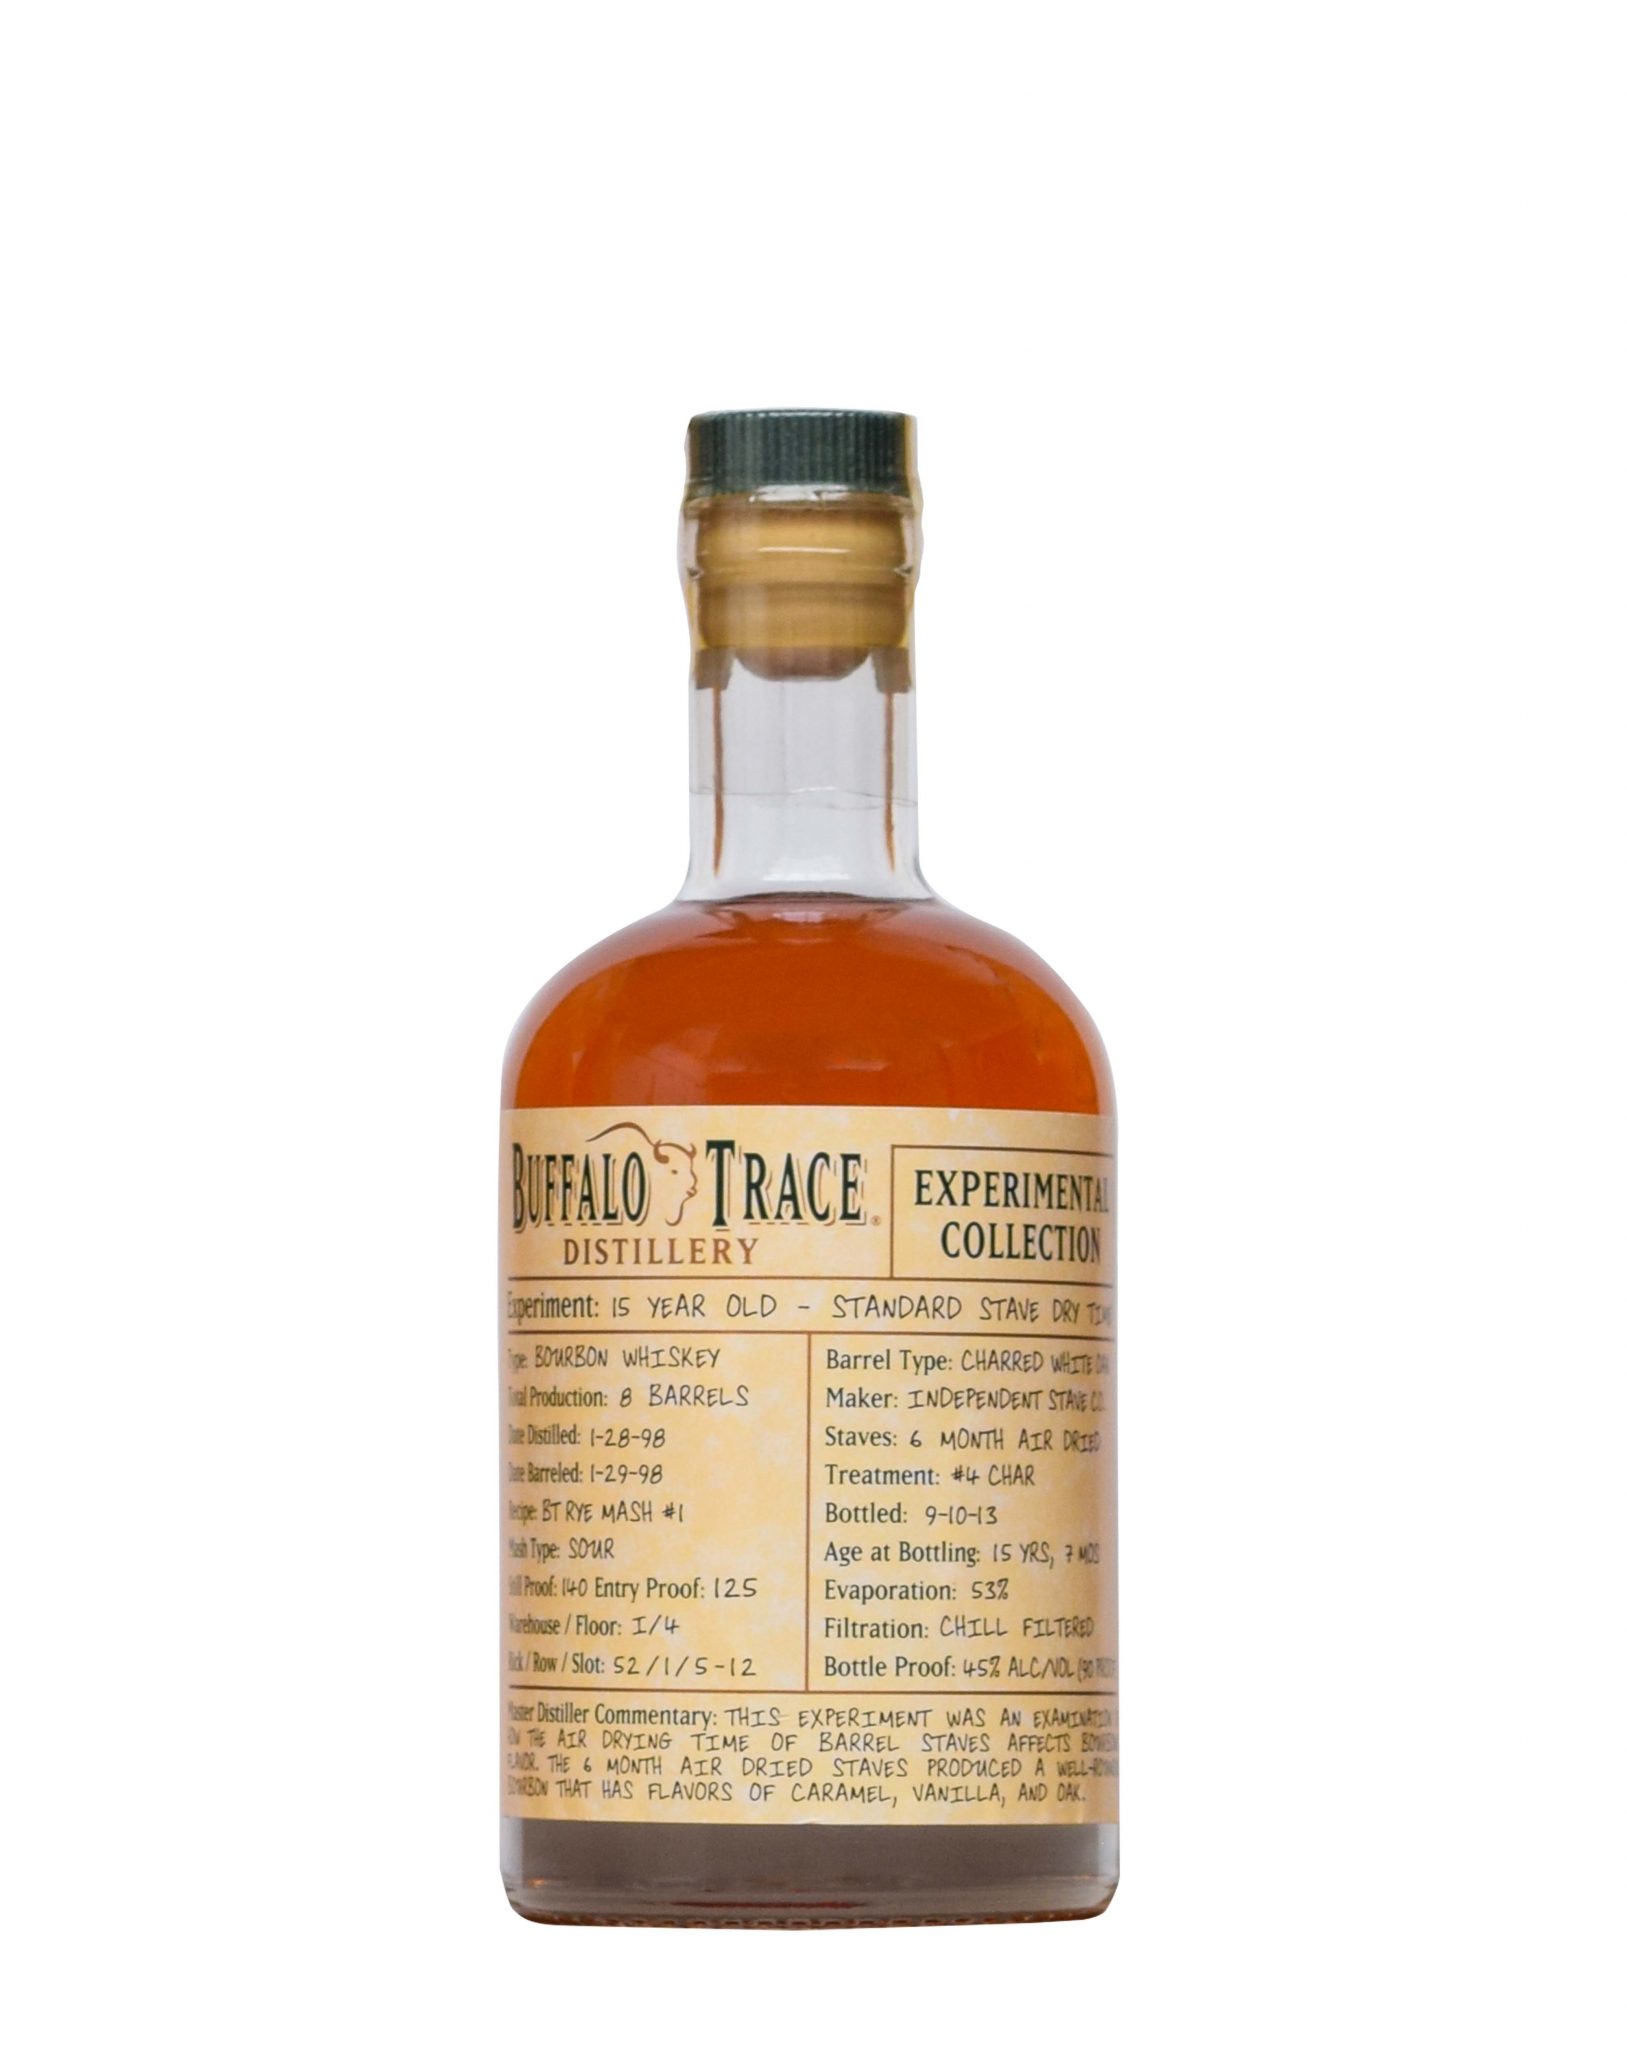 Buffalo Trace Experimental Collection 15 Year Old - Standard Stave Dry Time